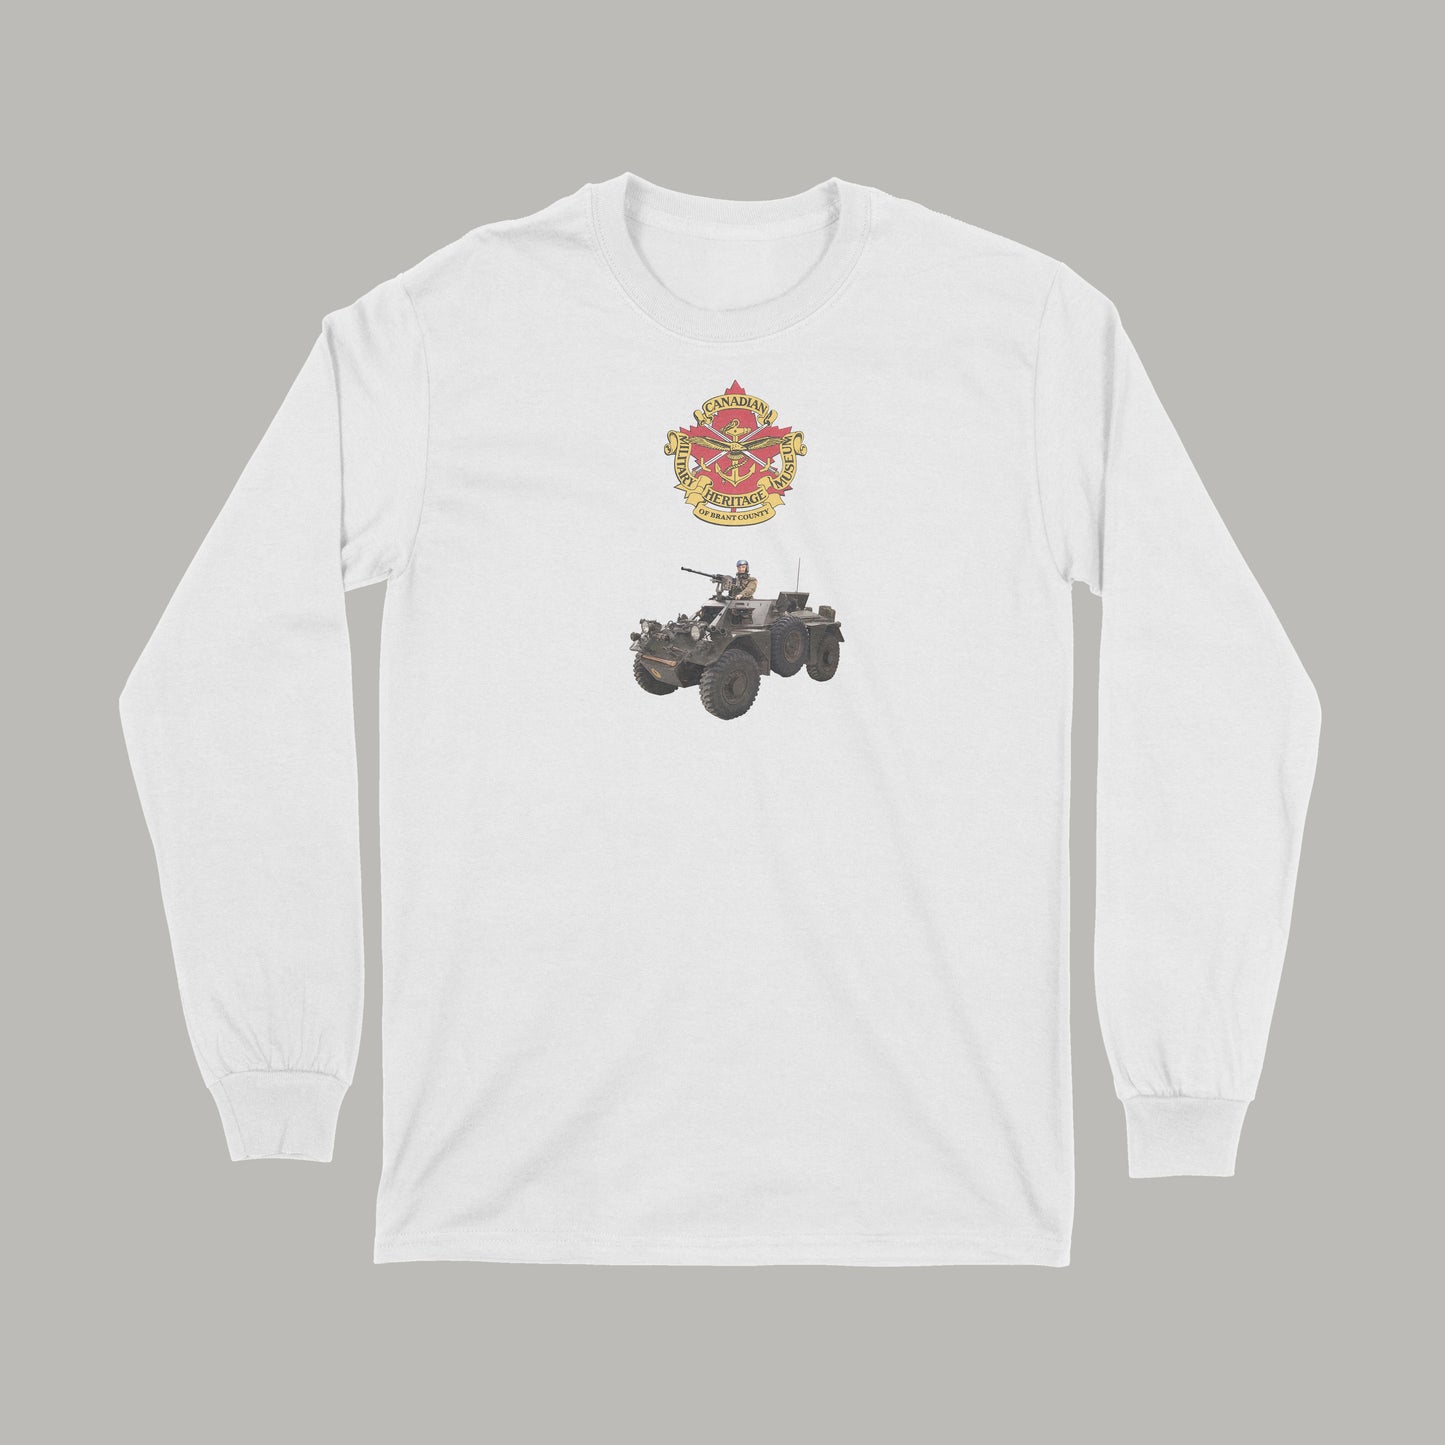 Brantford, Canadian Military Heritage Museum, Fat Dave, Ferret, Long Sleeve, Museum, White